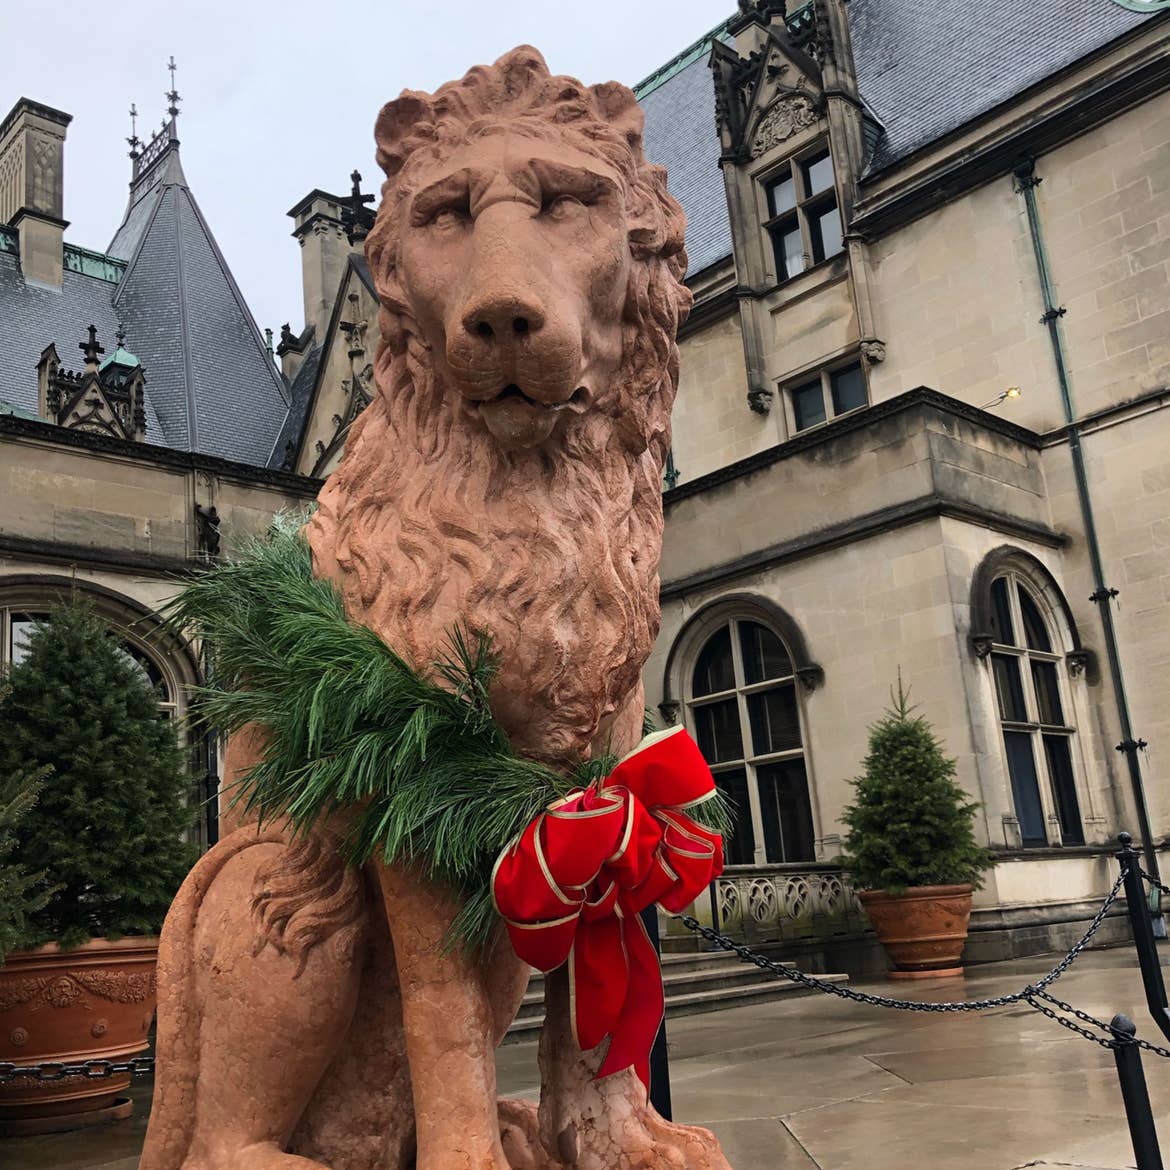 The exterior of the Biltmore Estate with a Lion statue decorated with a Christmas wreath and red bows.